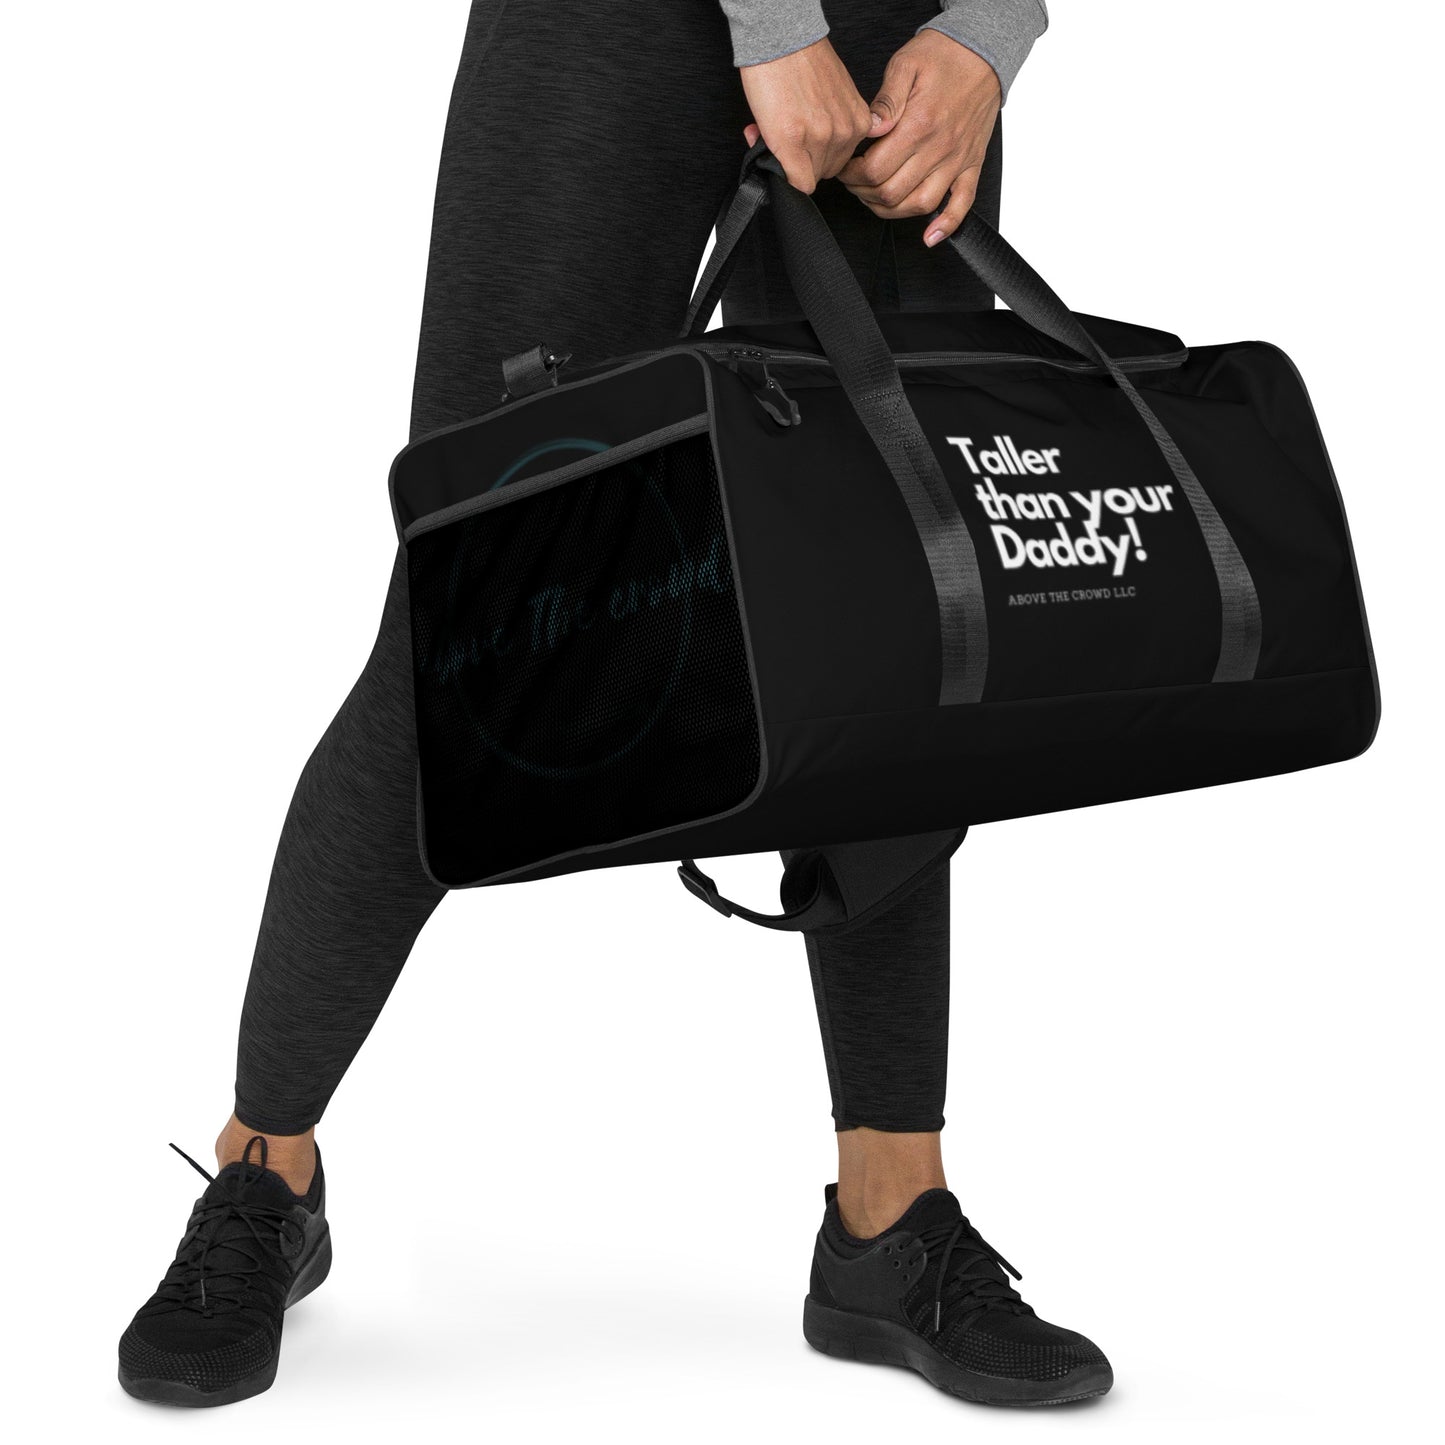 Black 'Taller than your Daddy' Duffle bag